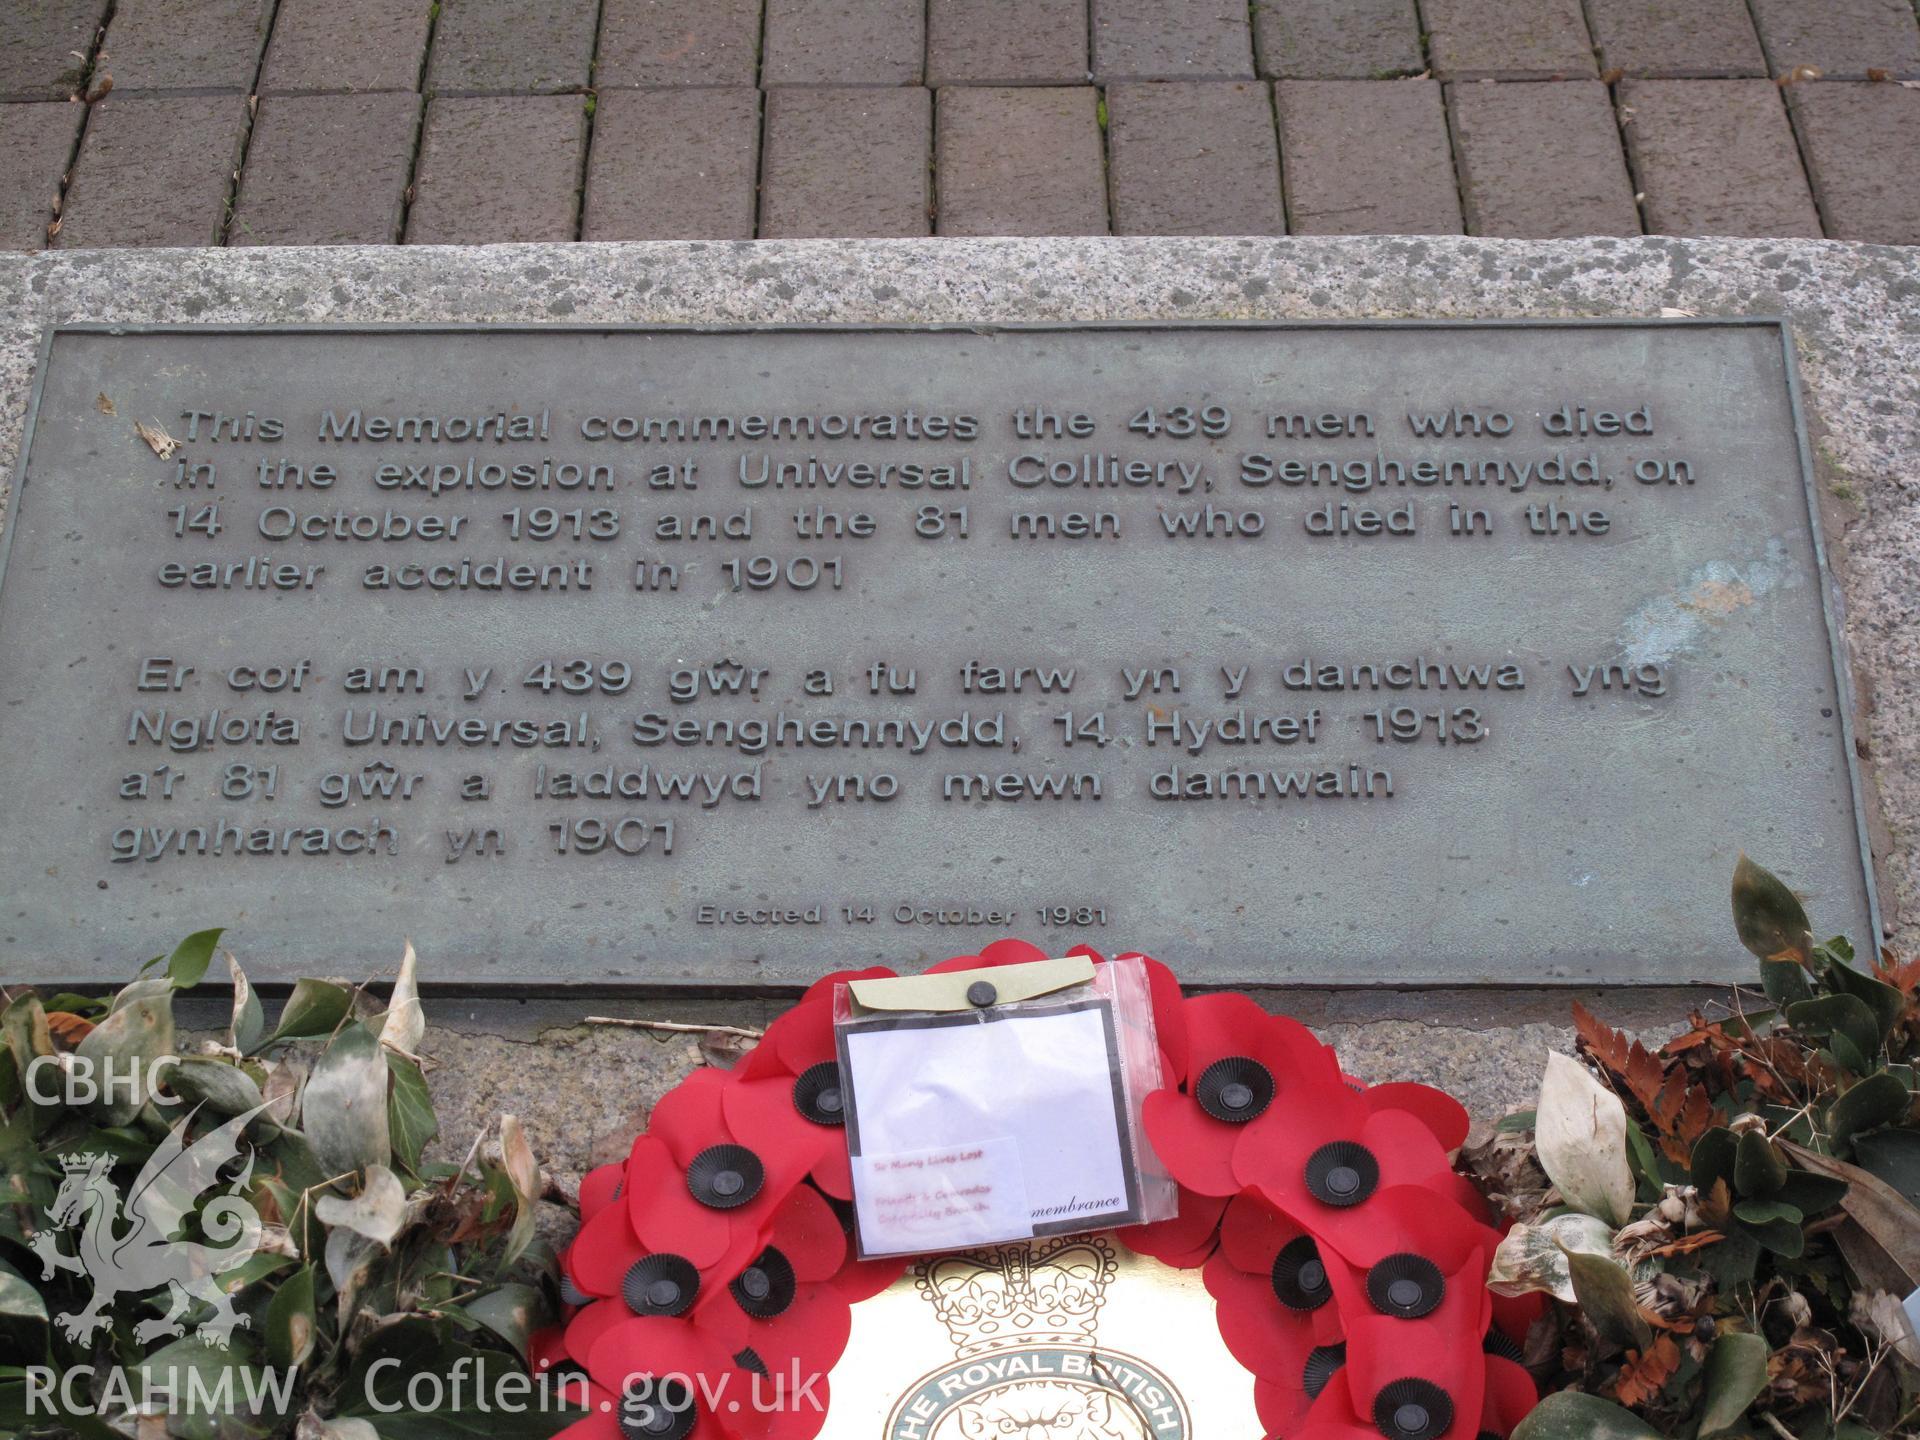 Detail of plaque at Universal Colliery Memorial, Senghenydd, taken by Brian Malaws on 12 February 2010.